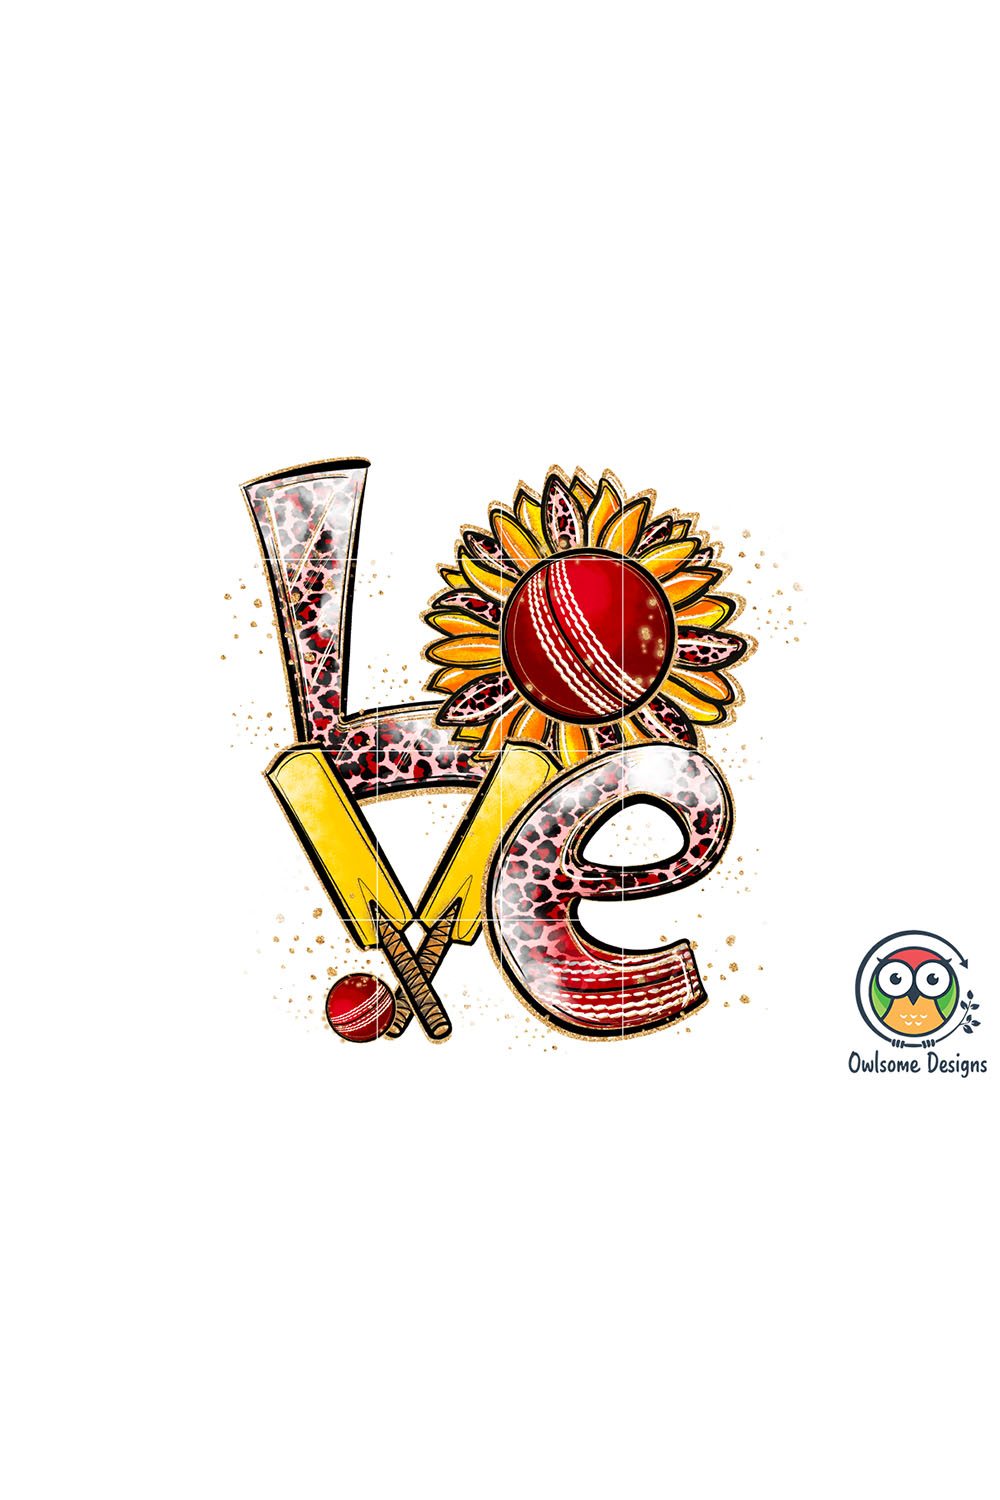 Image with colorful inscription love with cricket elements.